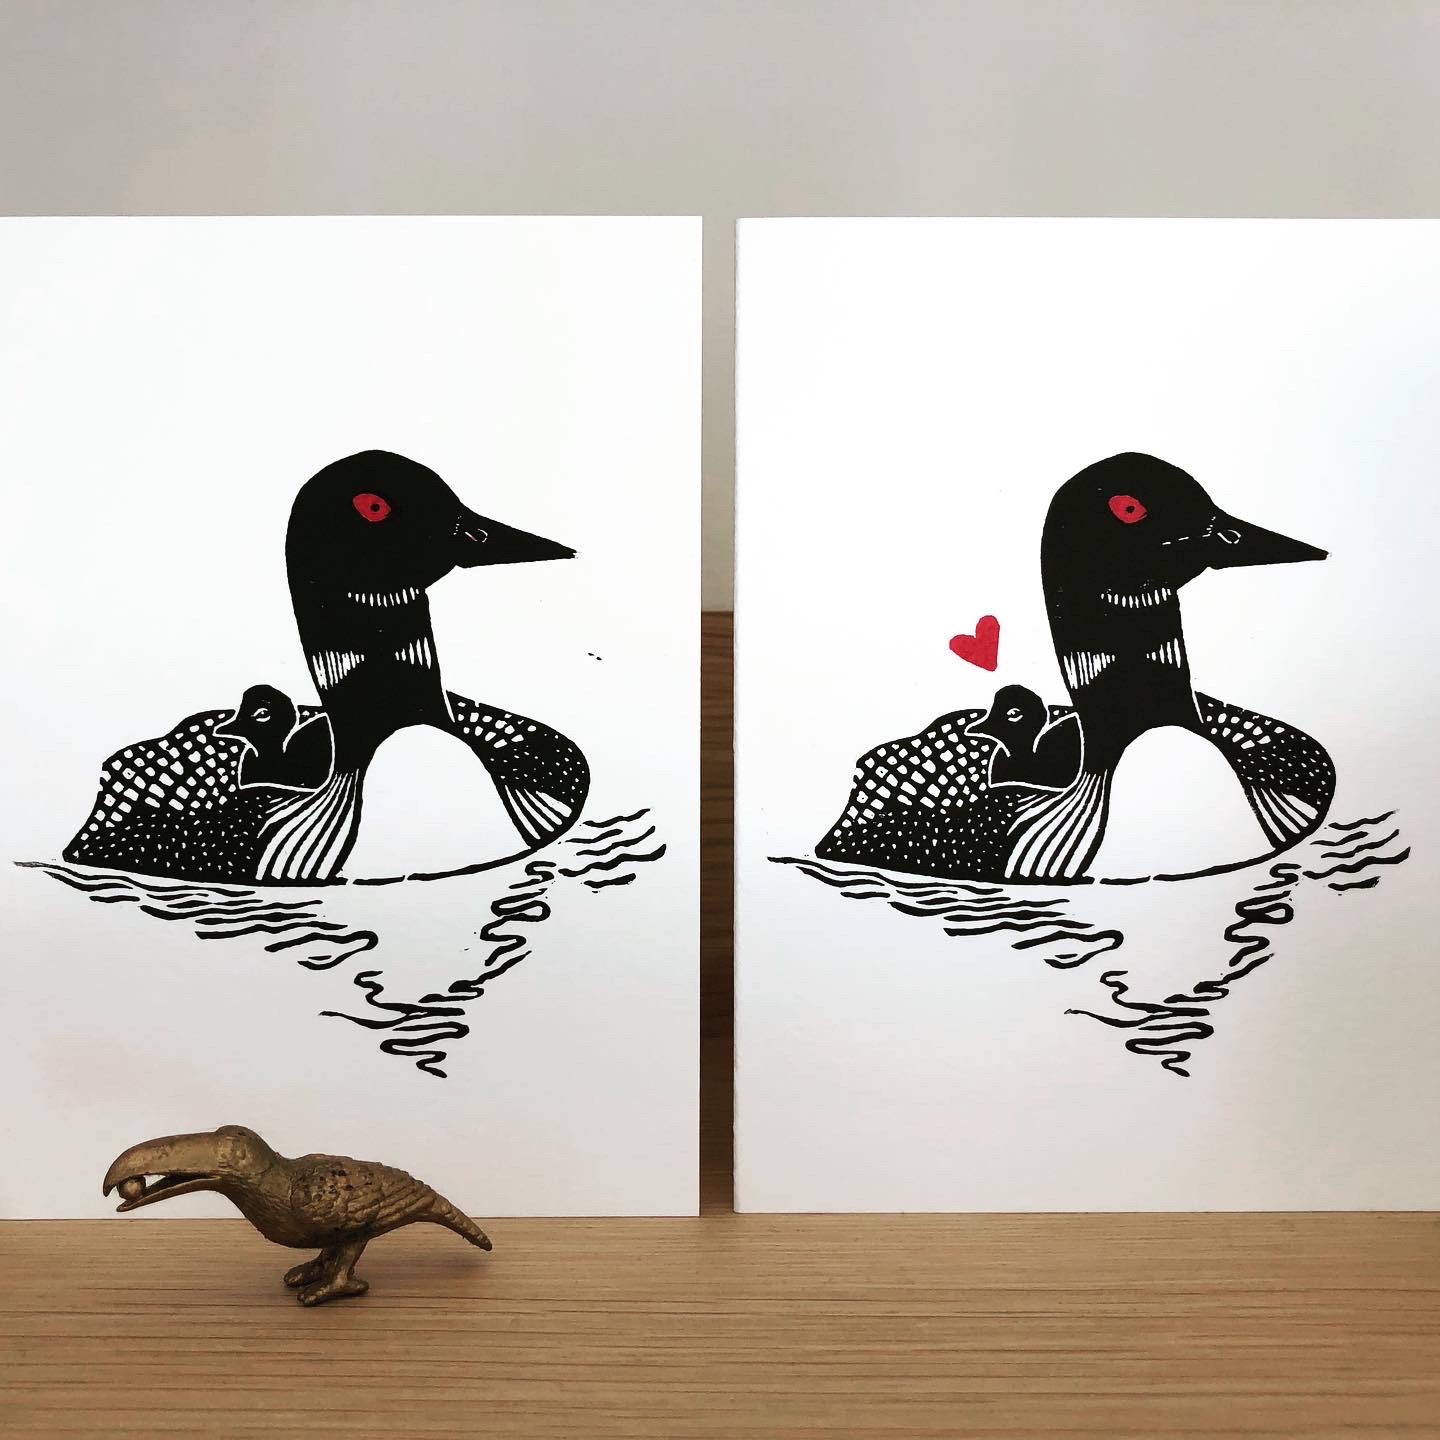 Two loon and chick cards side by side on a shelf. The left card has no heart above the chick, the right card does have a heart. Both cards show the adult loon with a red eye.